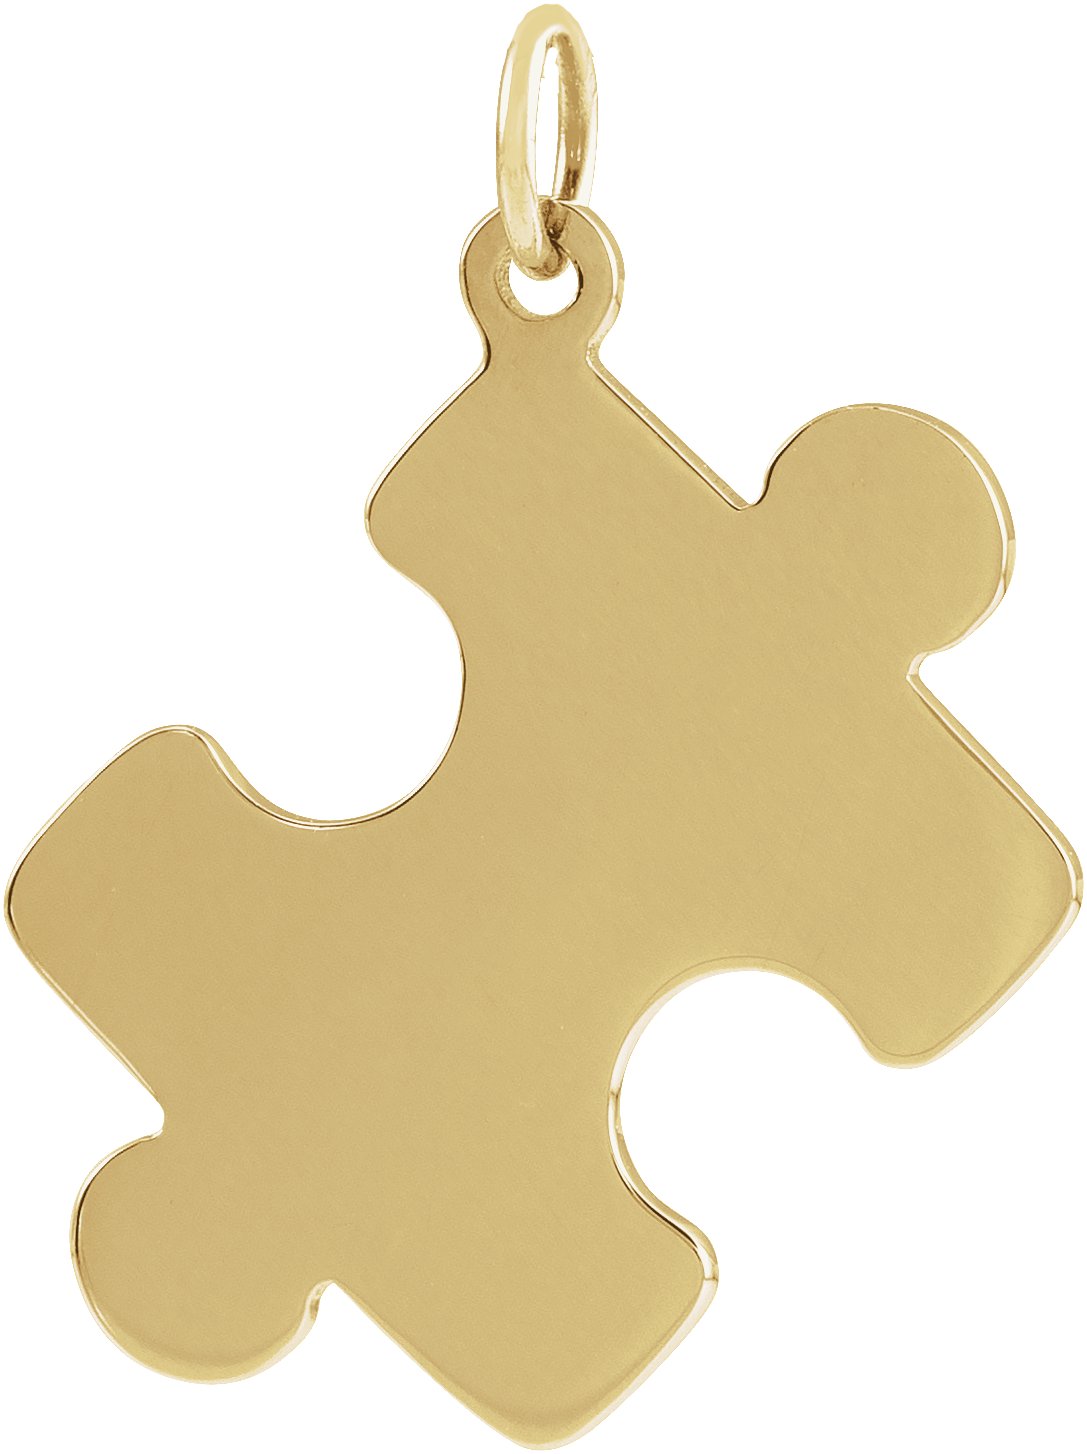 18K Yellow Gold-Plated Sterling Silver 15.65x12 mm Puzzle Piece Pendant